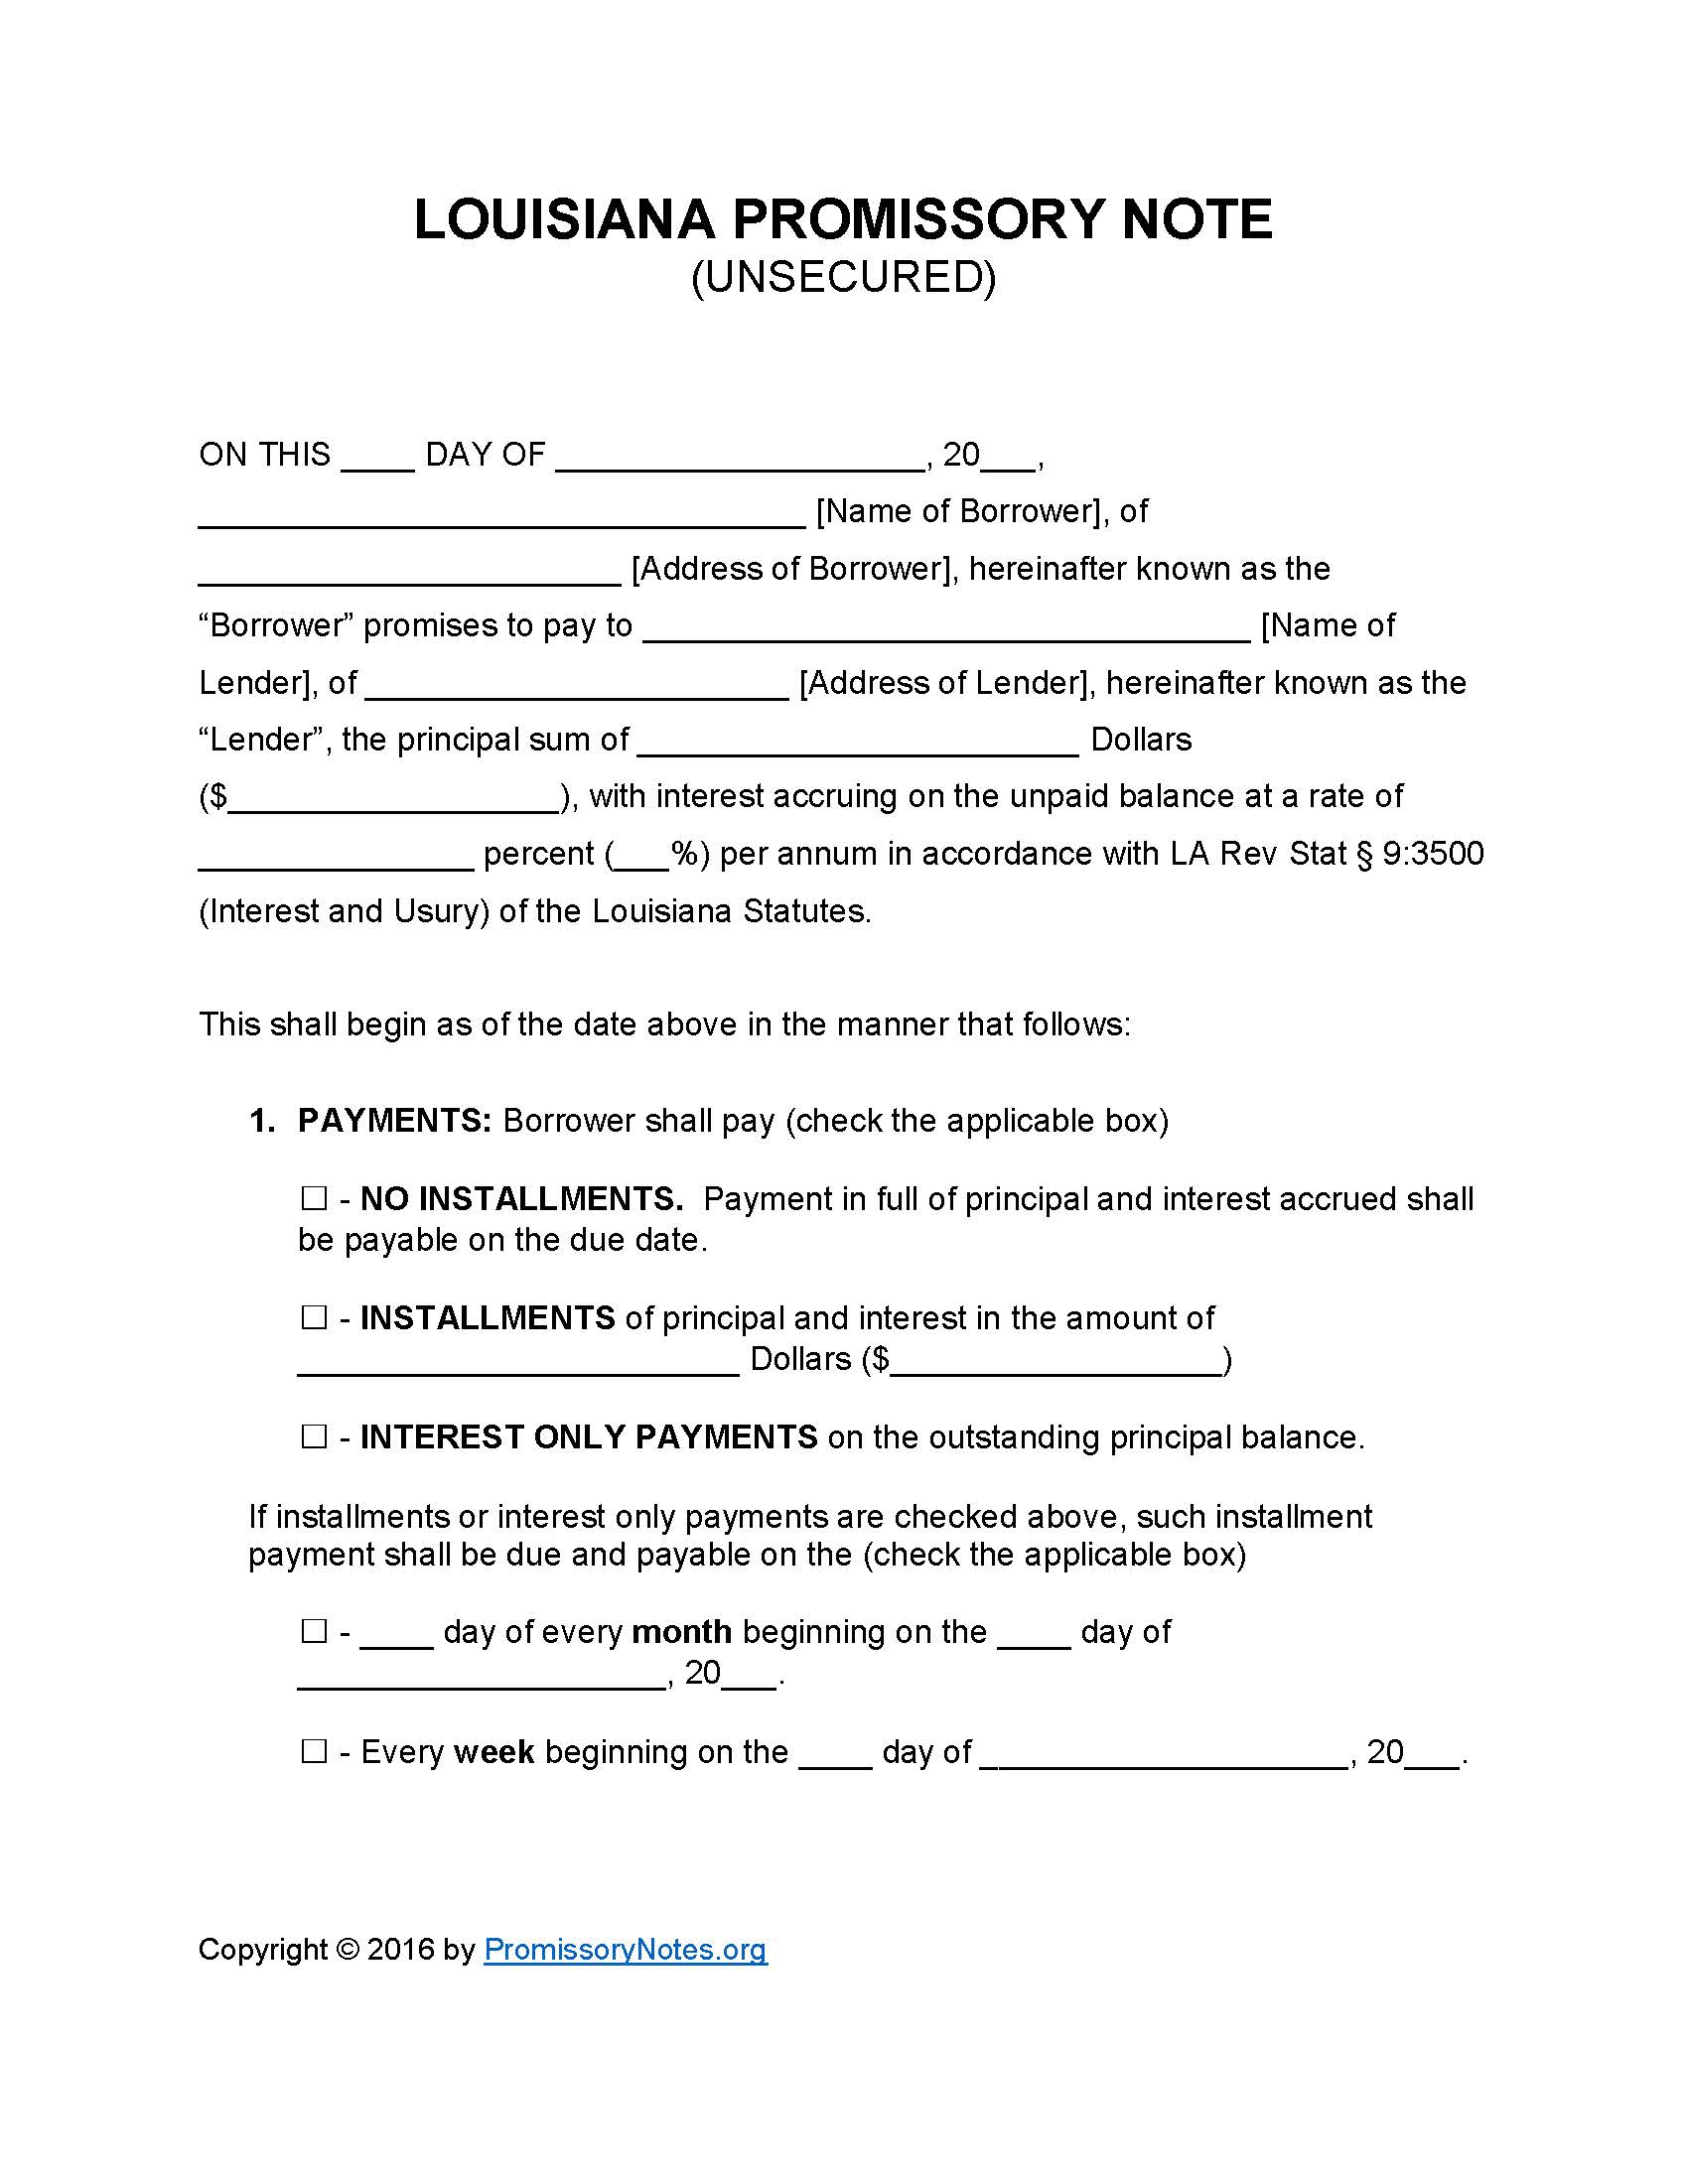 louisiana-unsecured-promissory-note-form